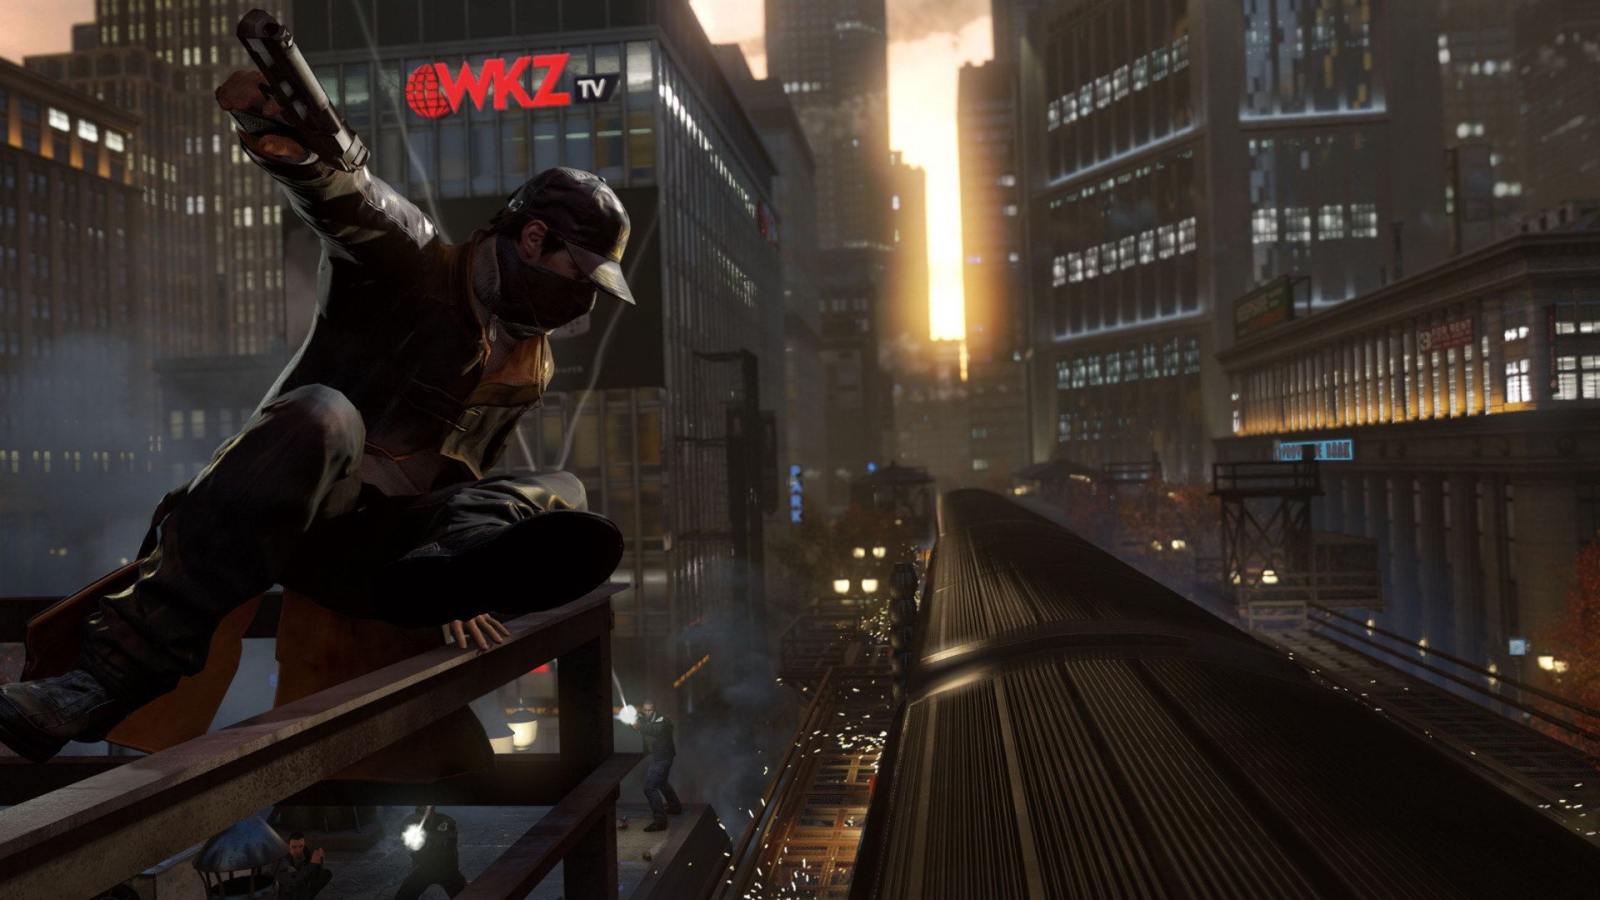 Watch Dogs: jumping on the train